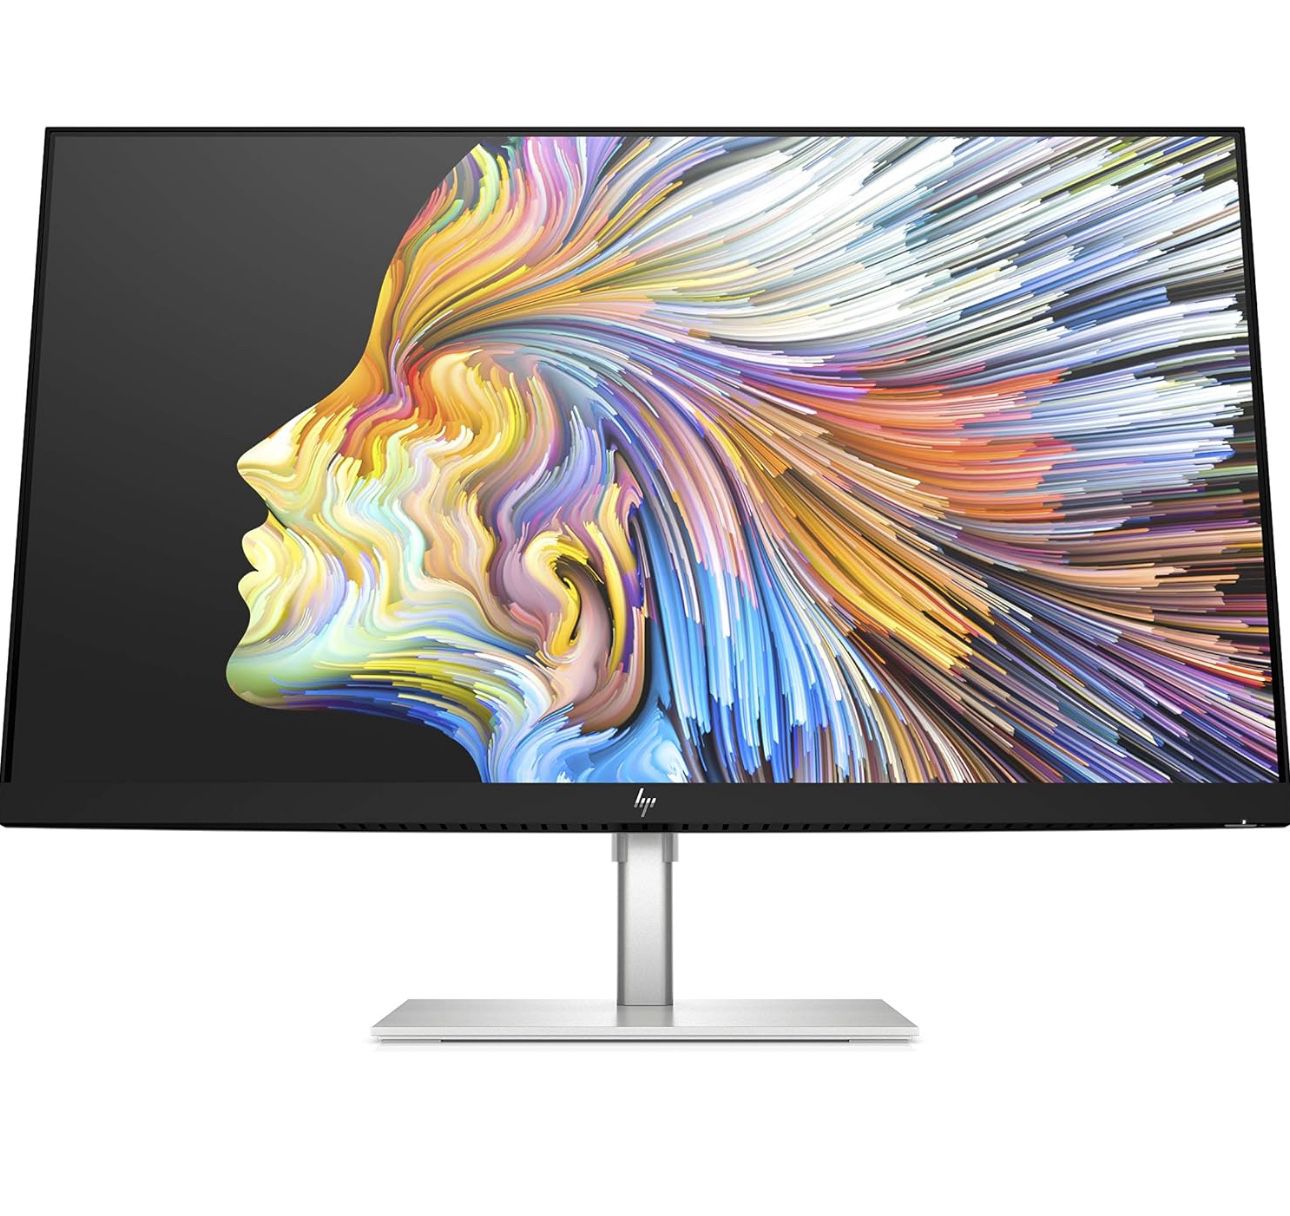 HP U28 4K HDR - Computer Monitor for Content Creators with IPS Panel, HDR, and USB-C Port - Wide Screen 28-inch, with Factory Color Calibration and 65